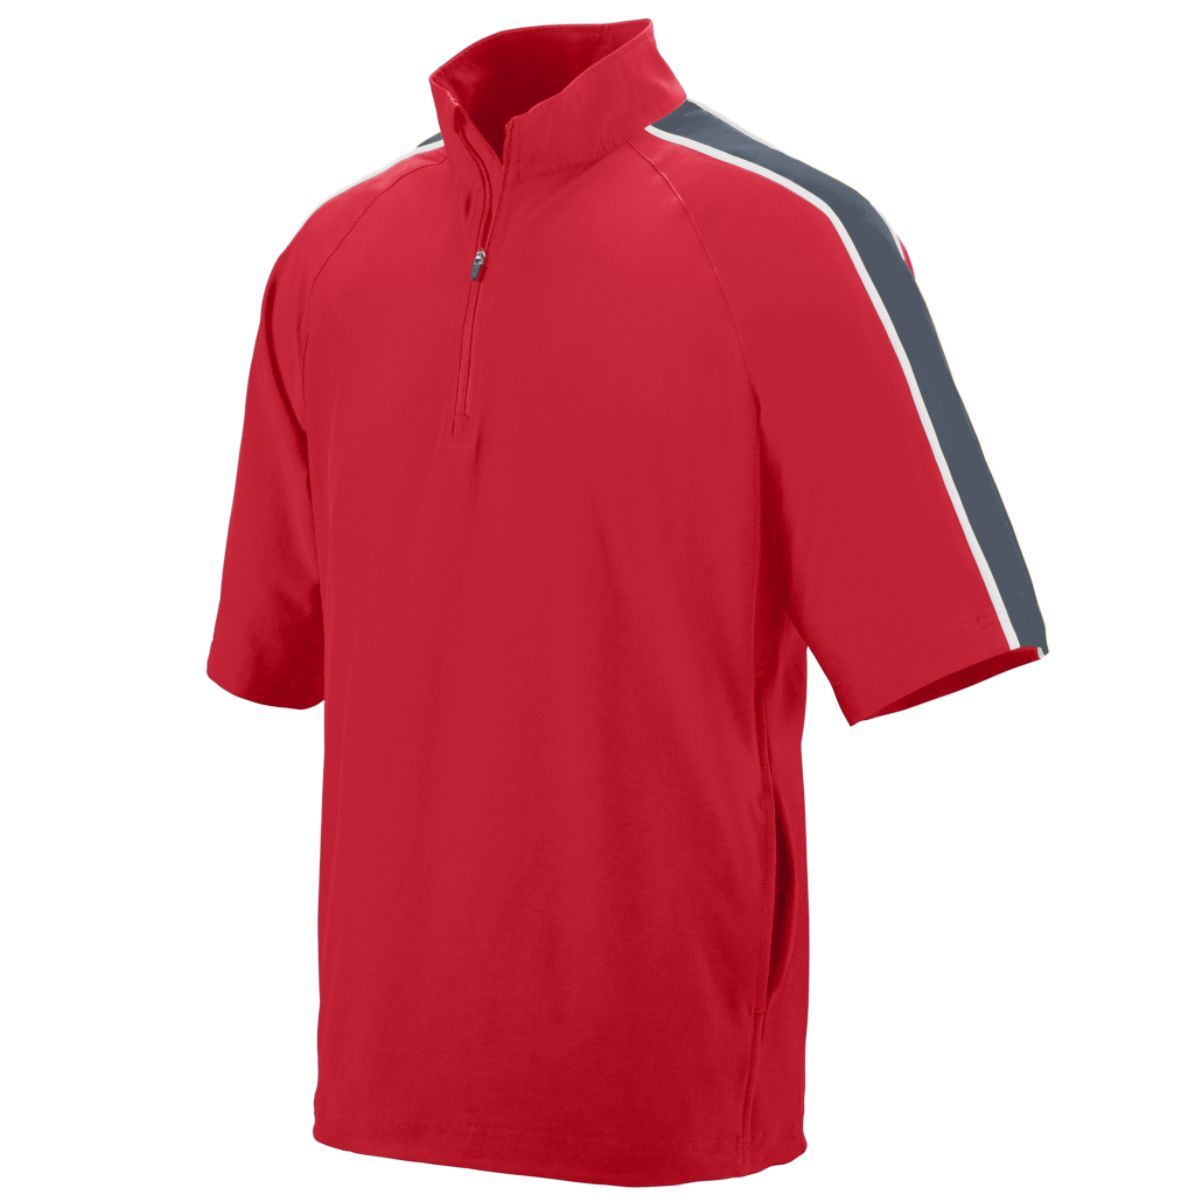 Augusta Sportswear Quantum Short Sleeve Pullover in Red/Graphite/White  -Part of the Adult, Adult-Jacket, Augusta-Products, Outerwear product lines at KanaleyCreations.com